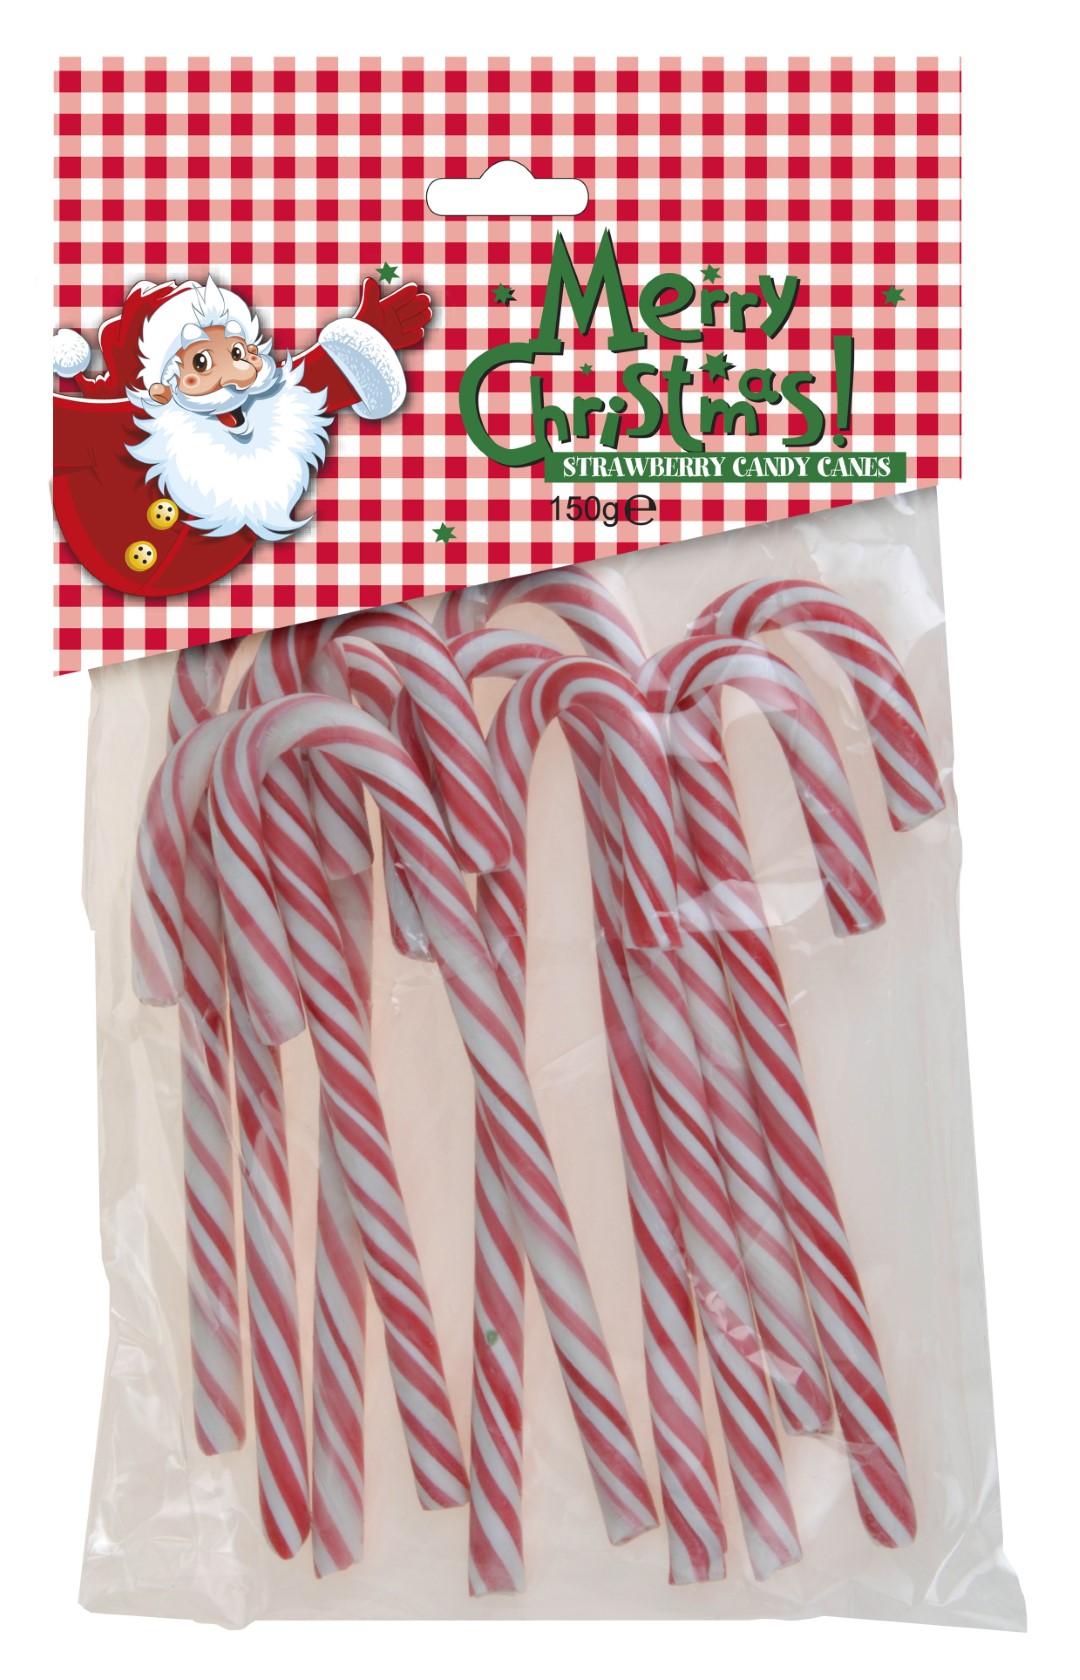 5 stuks! Candy canes bag in display - Nampook